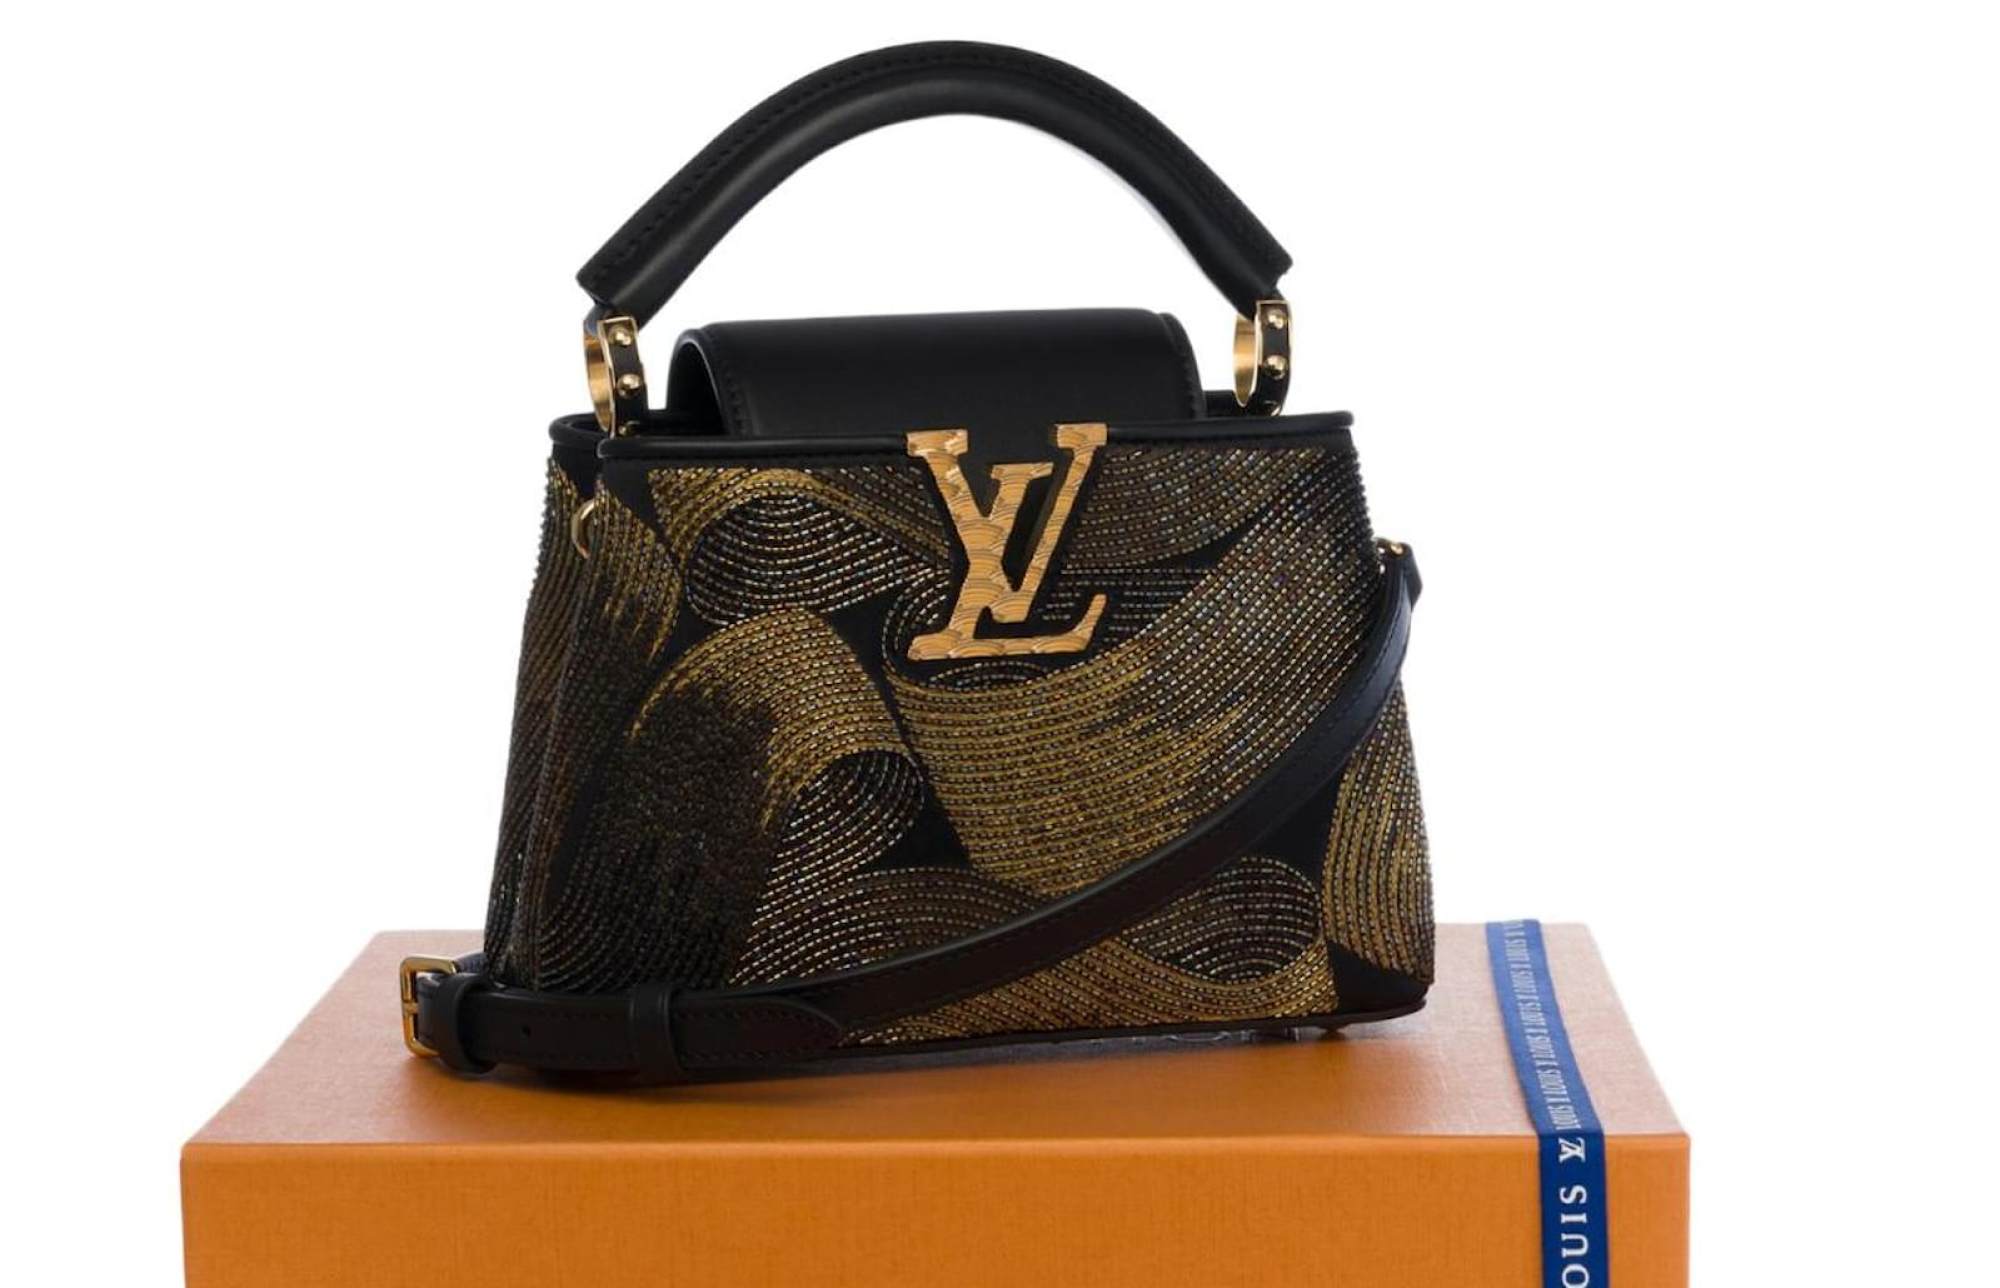 8 luxury bags made famous in films and TV shows, from Chanel 2.55 in  Breakfast at Tiffany's and Louis Vuitton in Mean Girls and Cruella, to  Hermès Birkins and Kellys – and